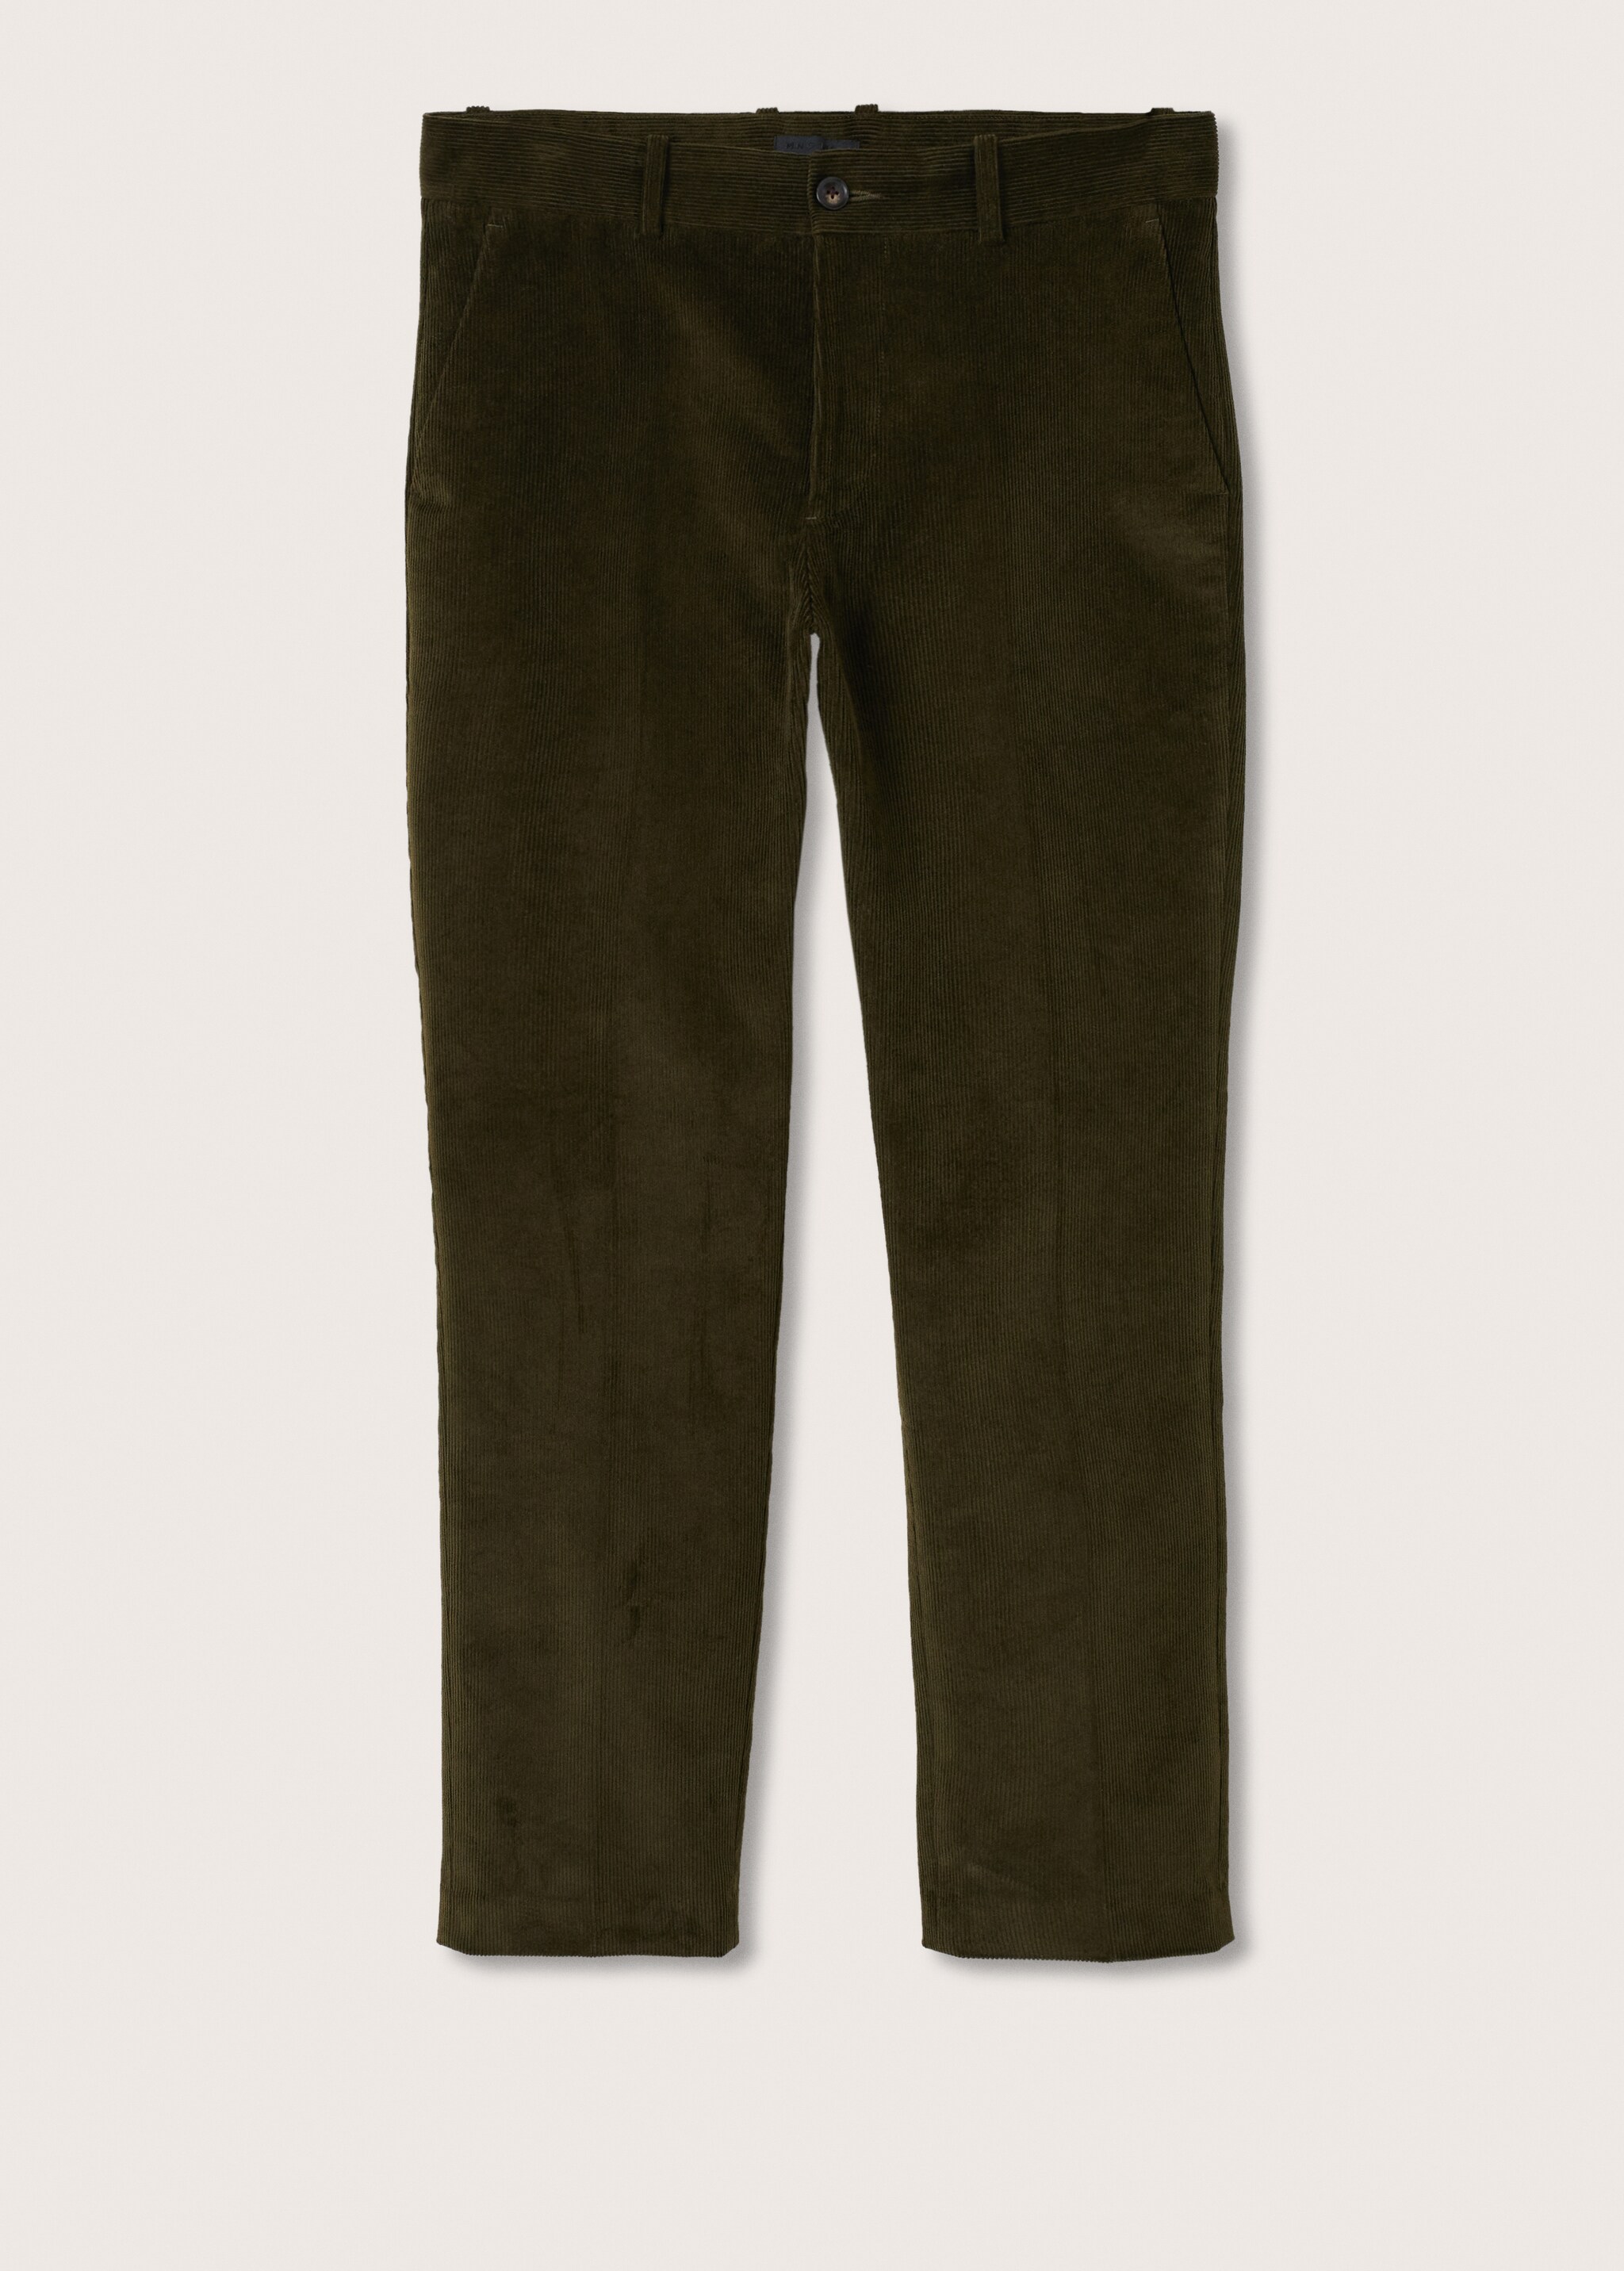 Regular fit corduroy trousers - Article without model